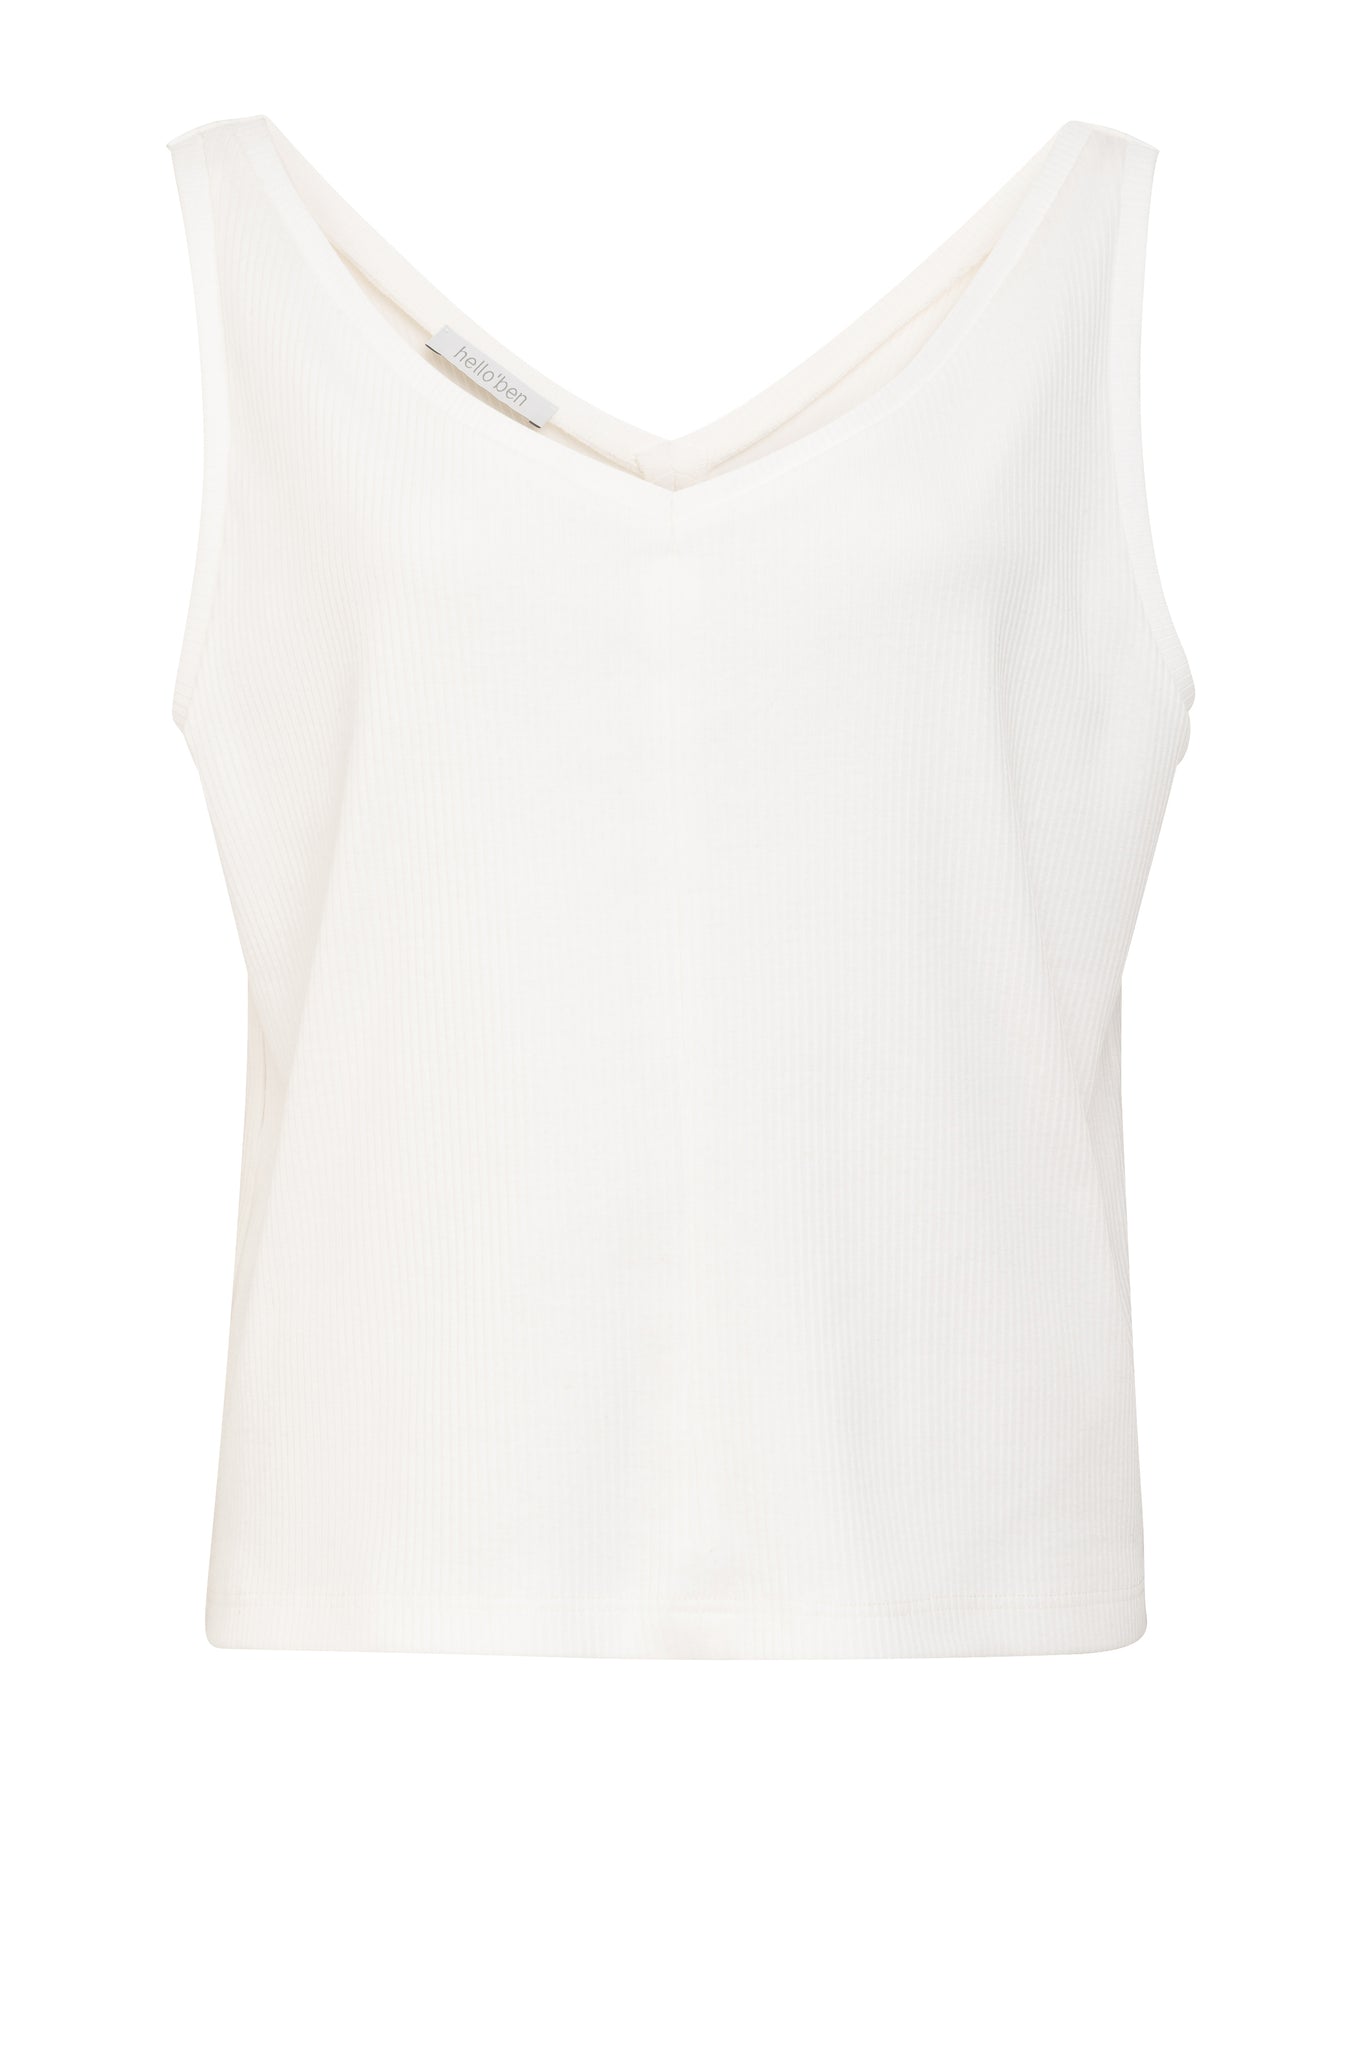 02/13 Organic Cotton Top V-neck white front by hello'ben